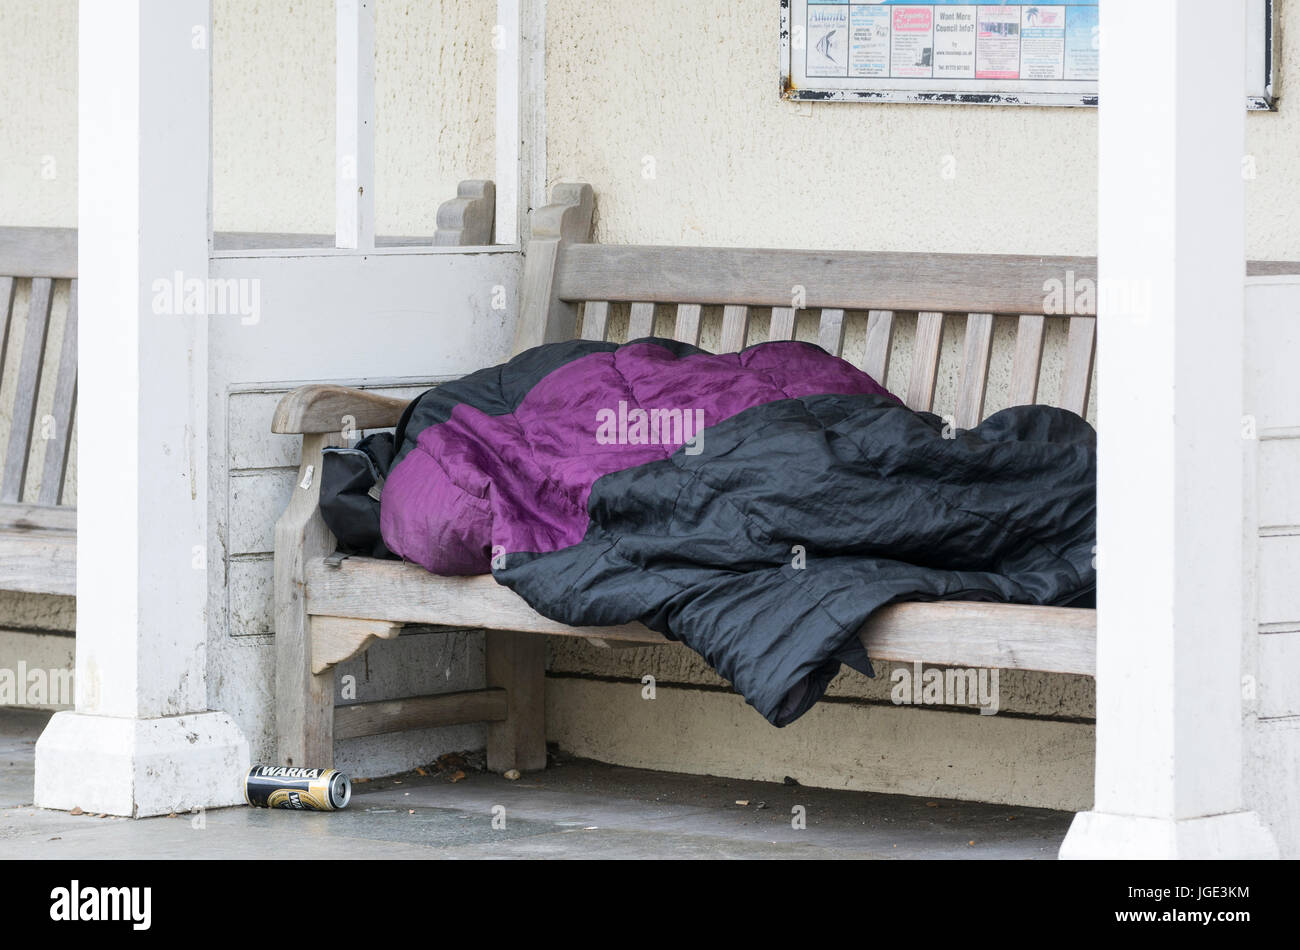 Sleeping rough on the streets. Homeless person sleeping on a bench in ...